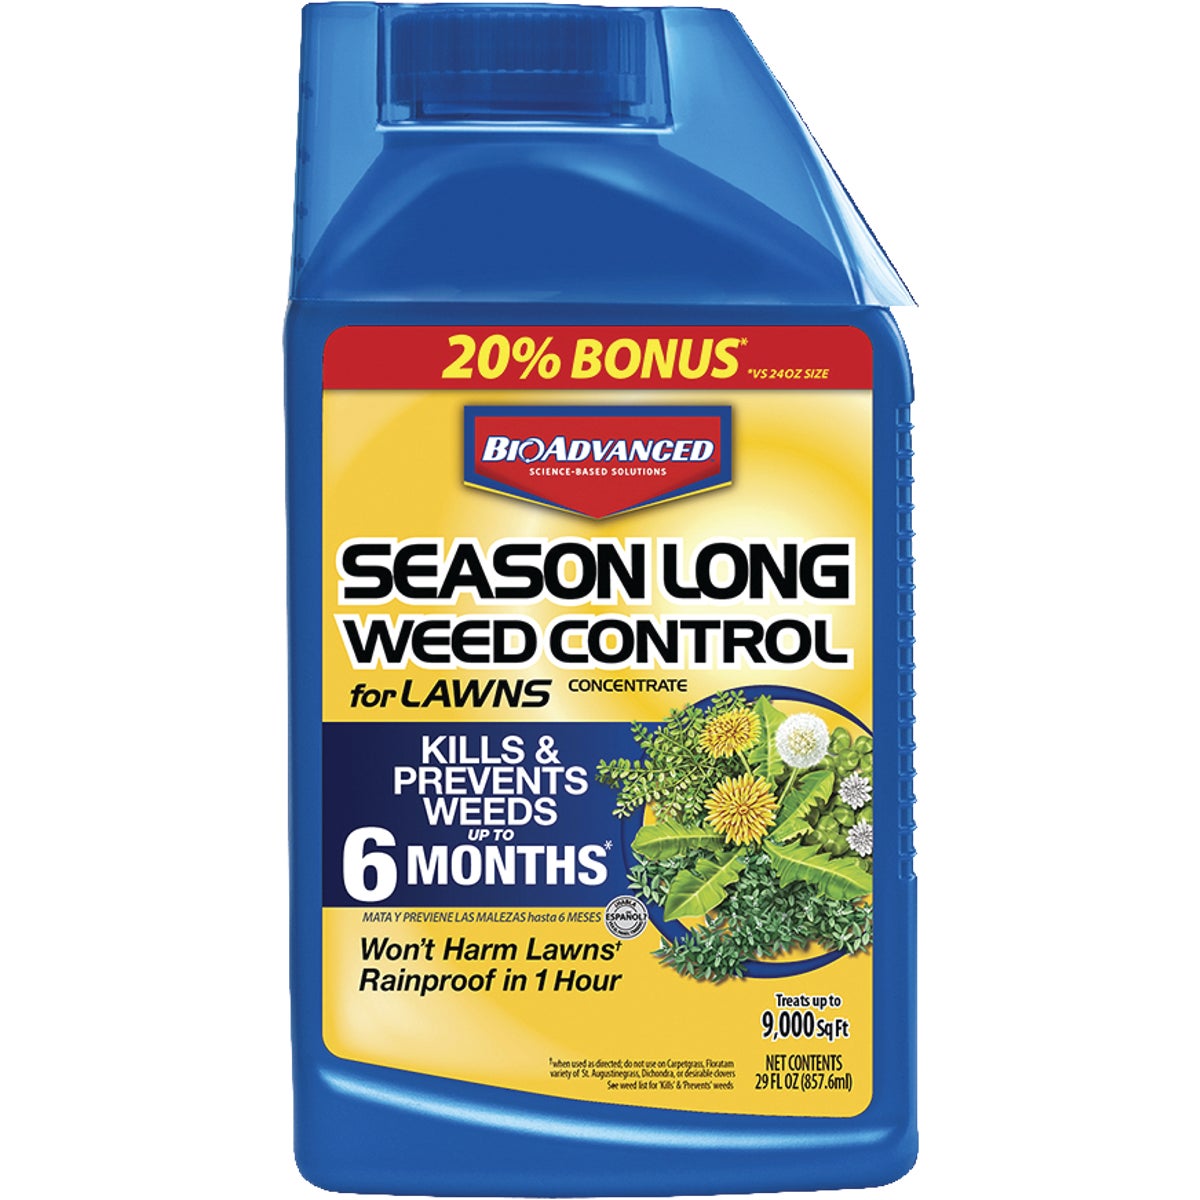 BioAdvanced 24 Oz. Concentrate Season Long Weed Control For Lawns